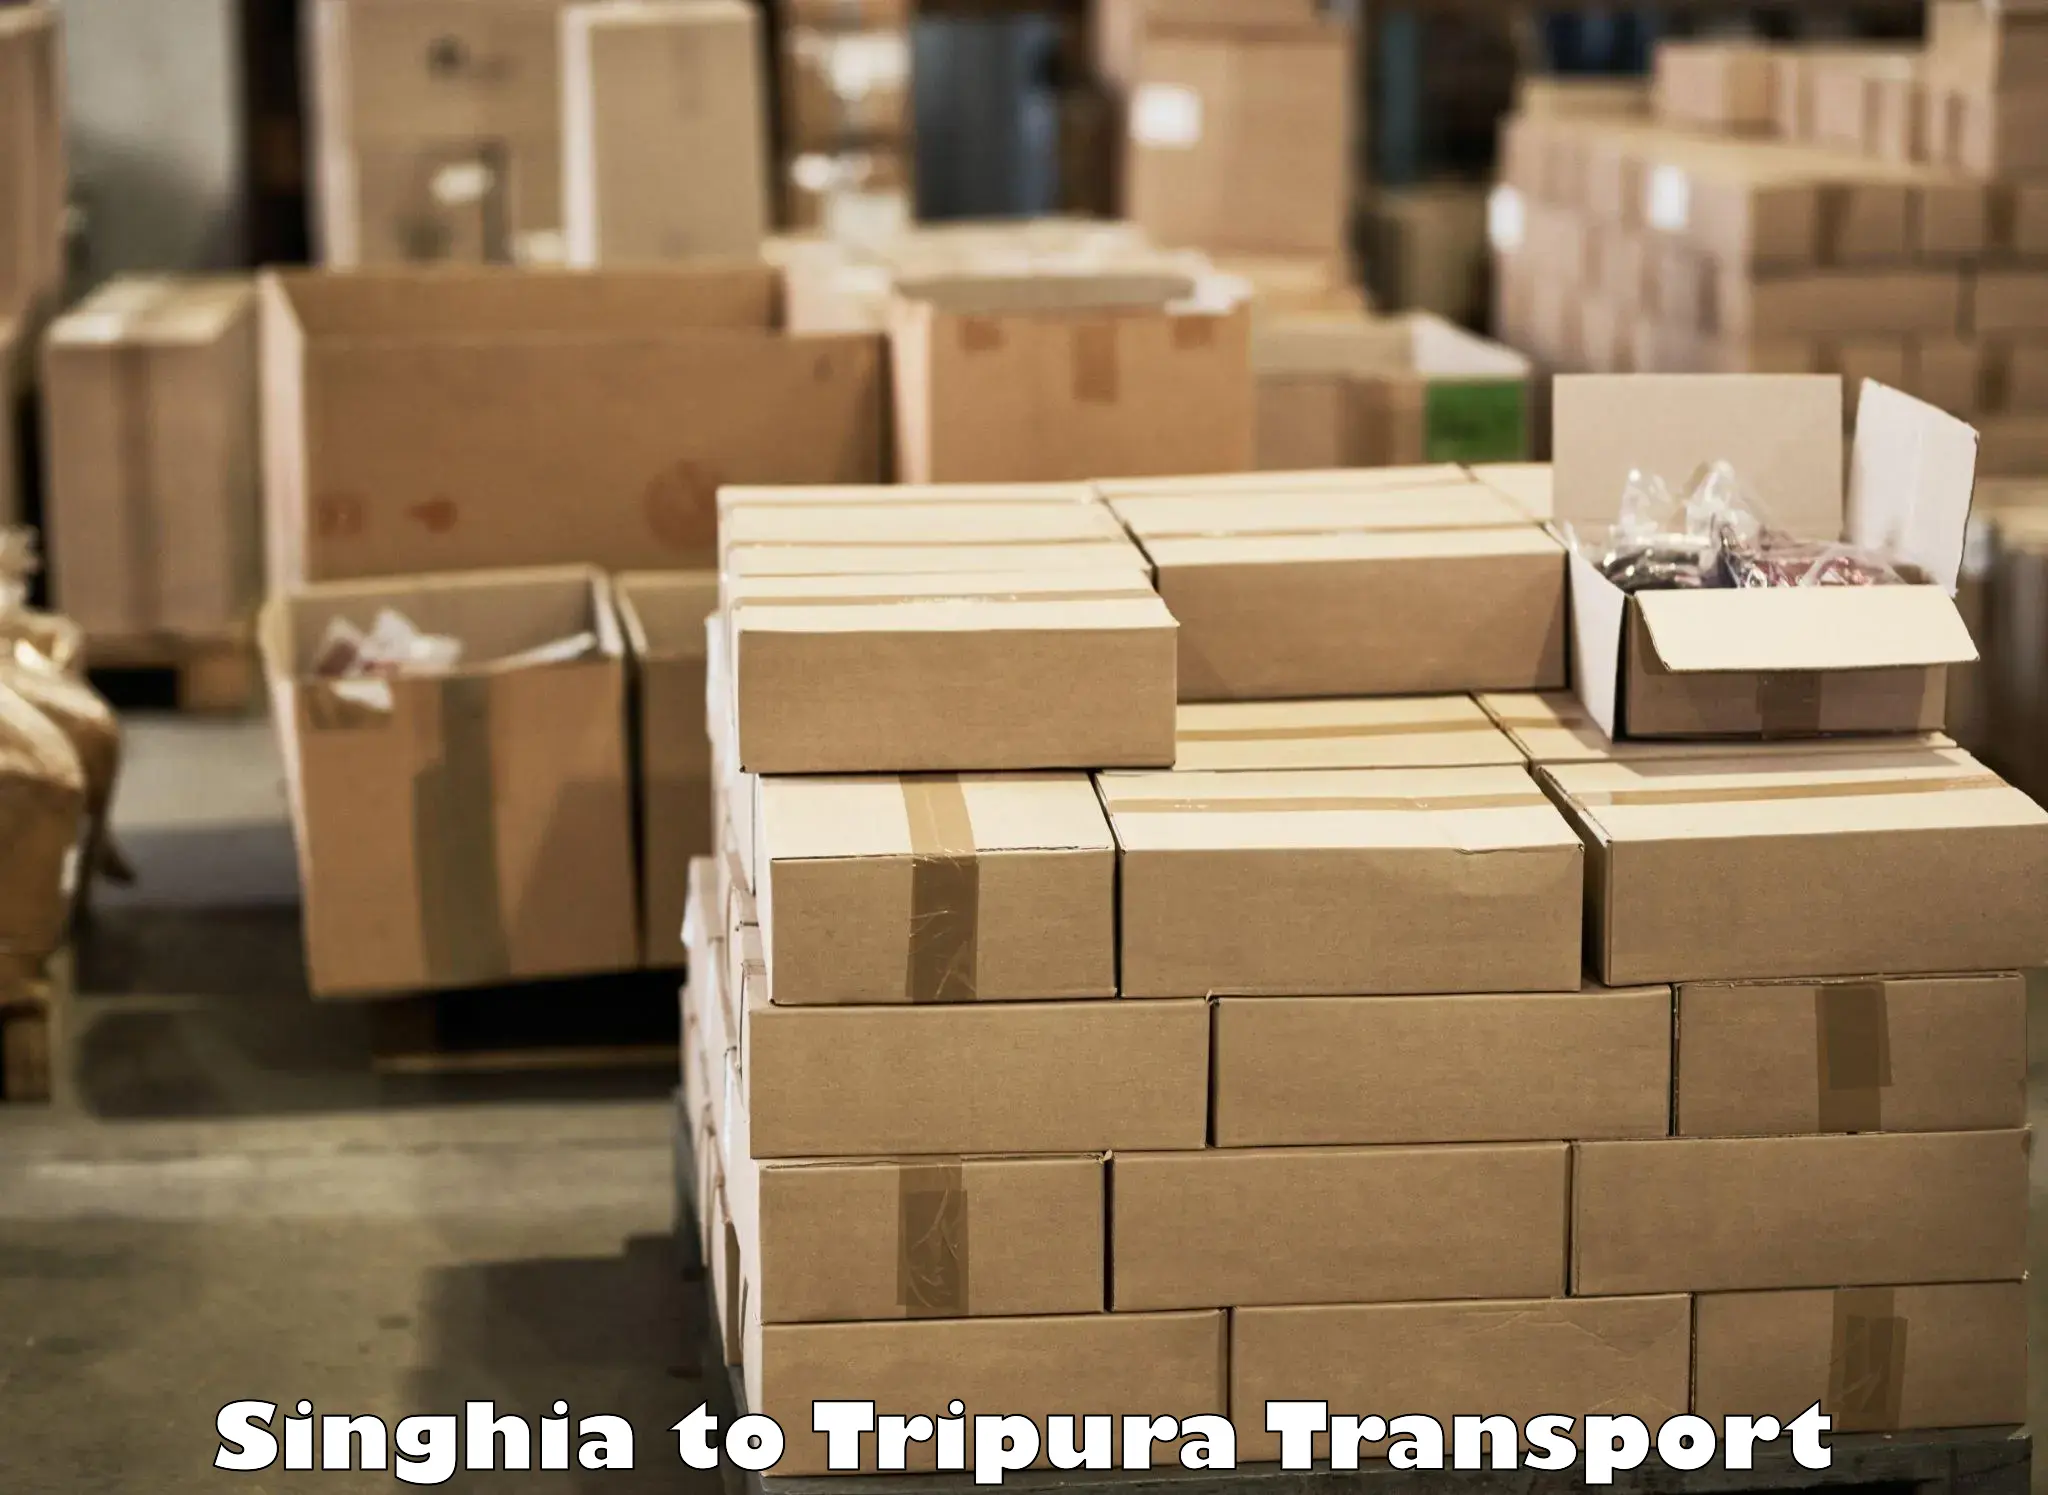 Nationwide transport services Singhia to Udaipur Tripura